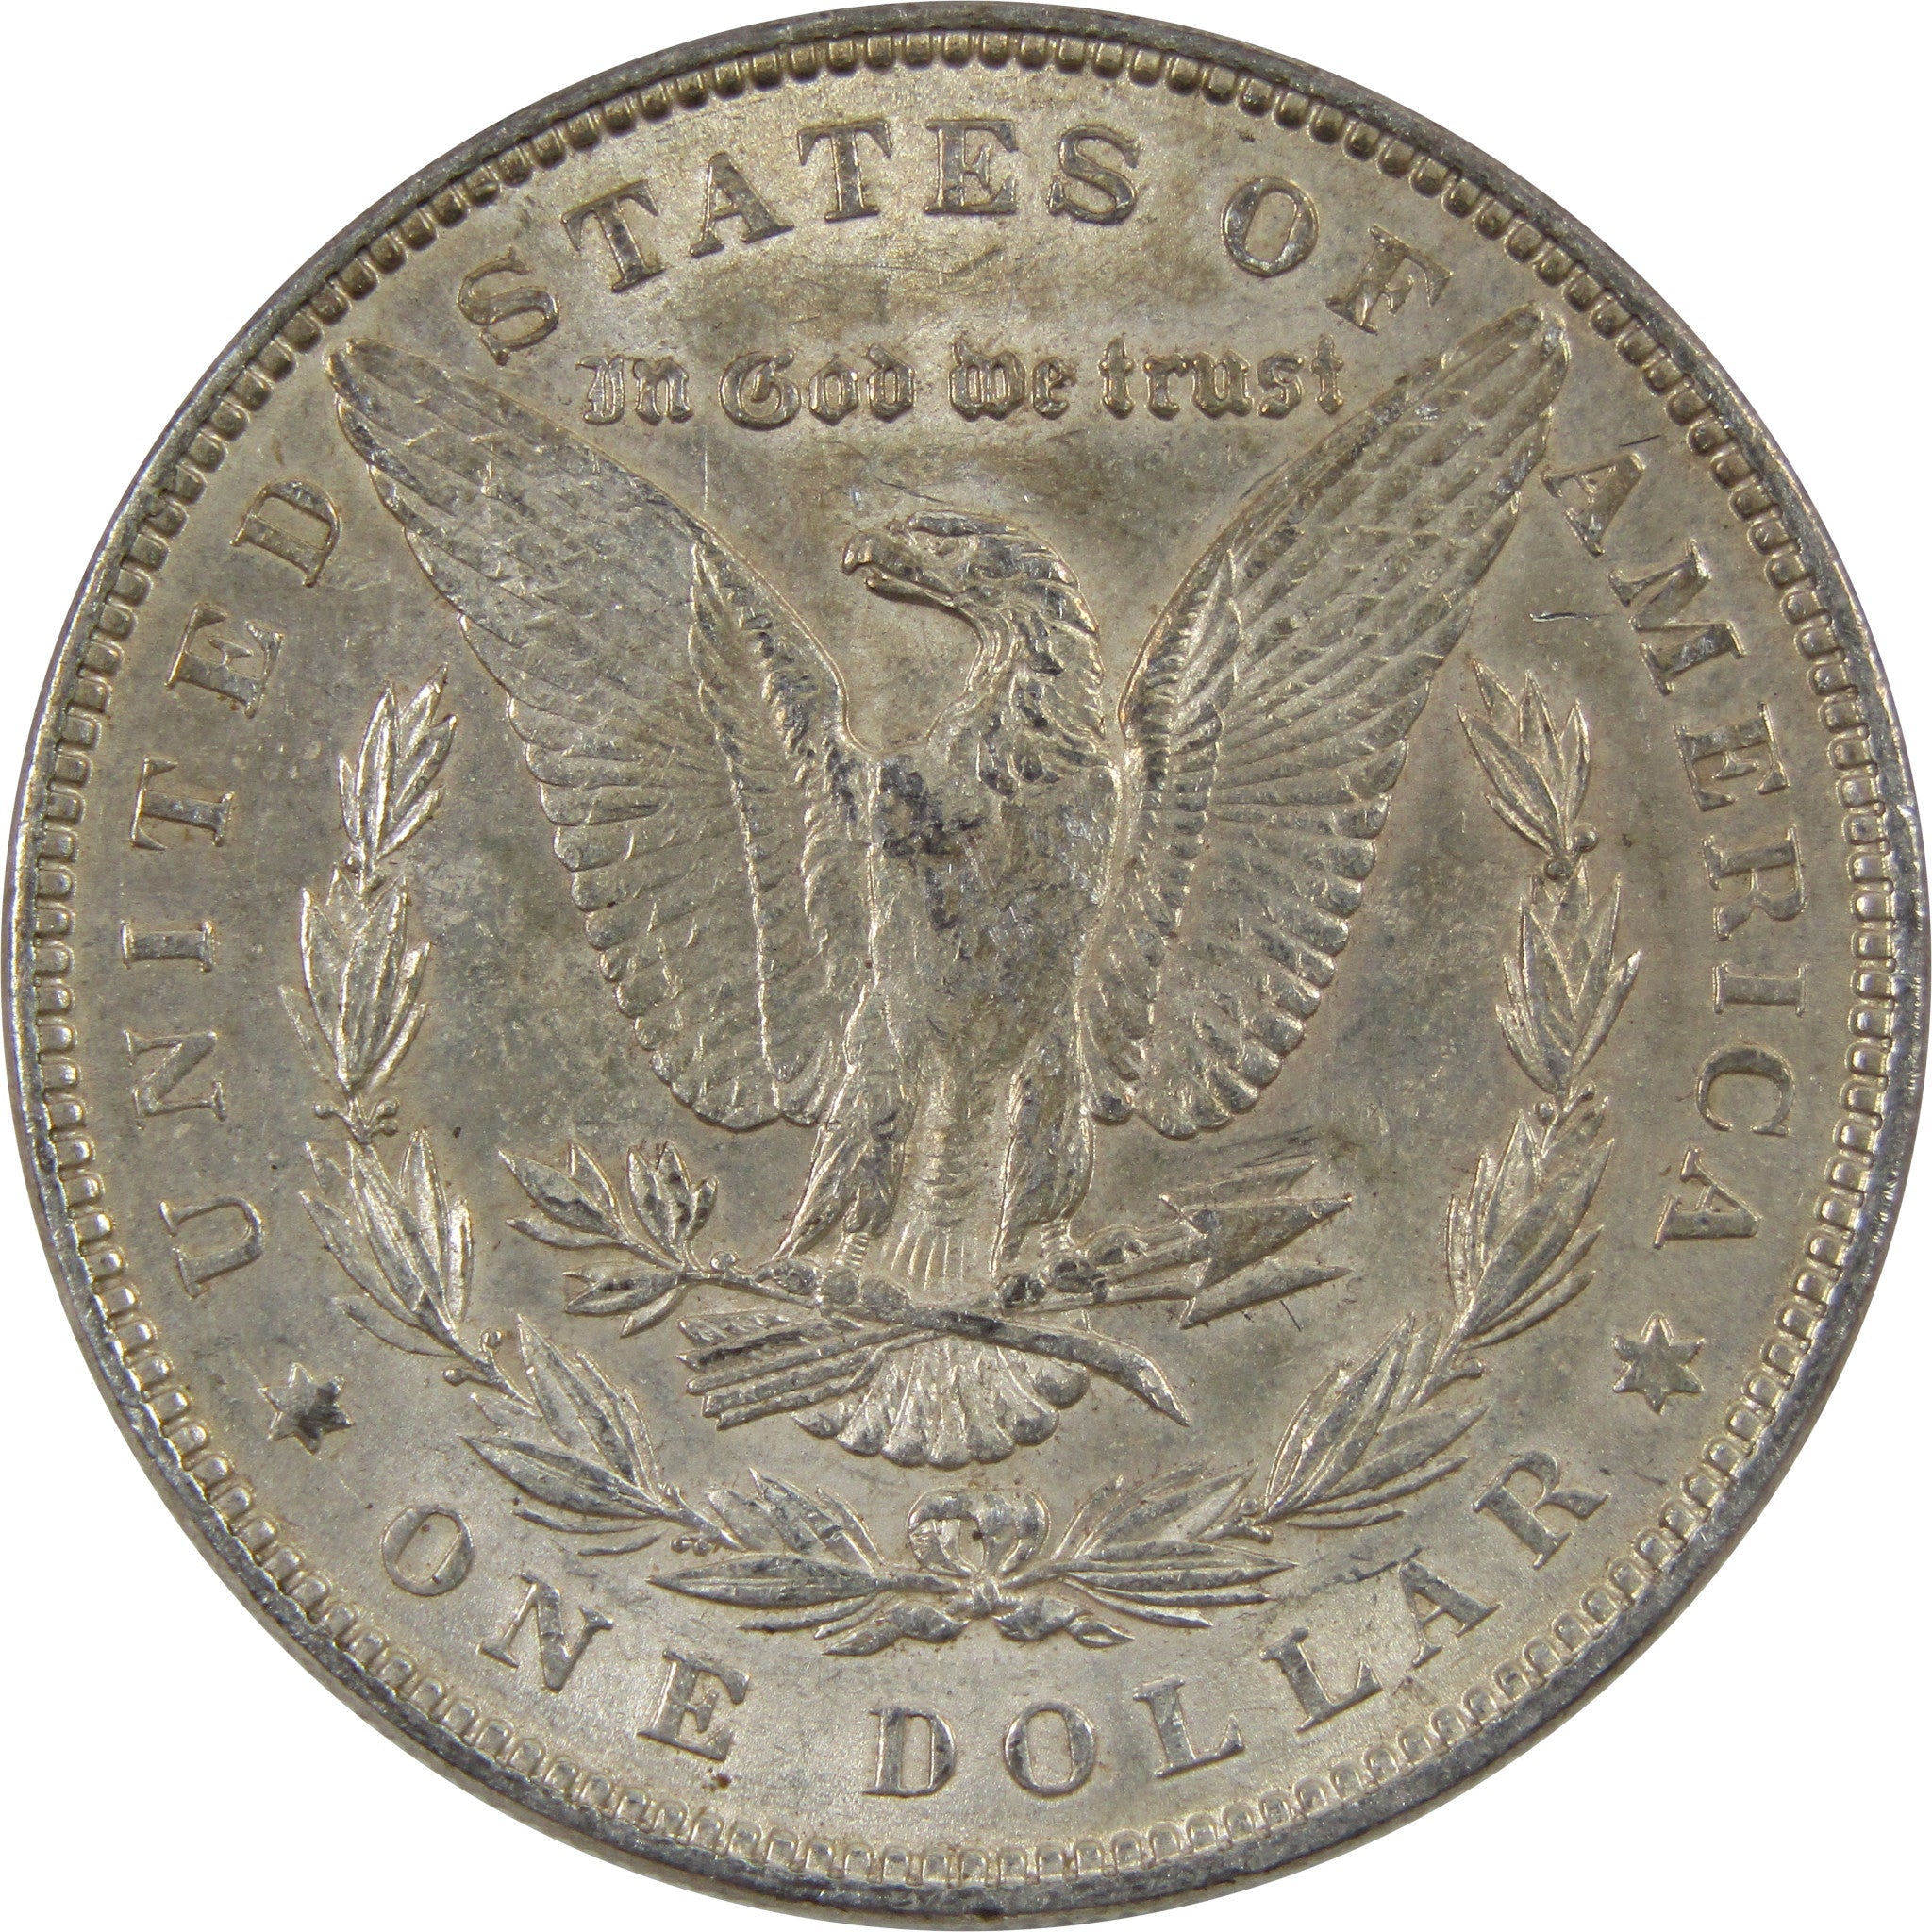 1887 Morgan Dollar AU About Uncirculated 90% Silver $1 Coin SKU:I5468 - Morgan coin - Morgan silver dollar - Morgan silver dollar for sale - Profile Coins &amp; Collectibles